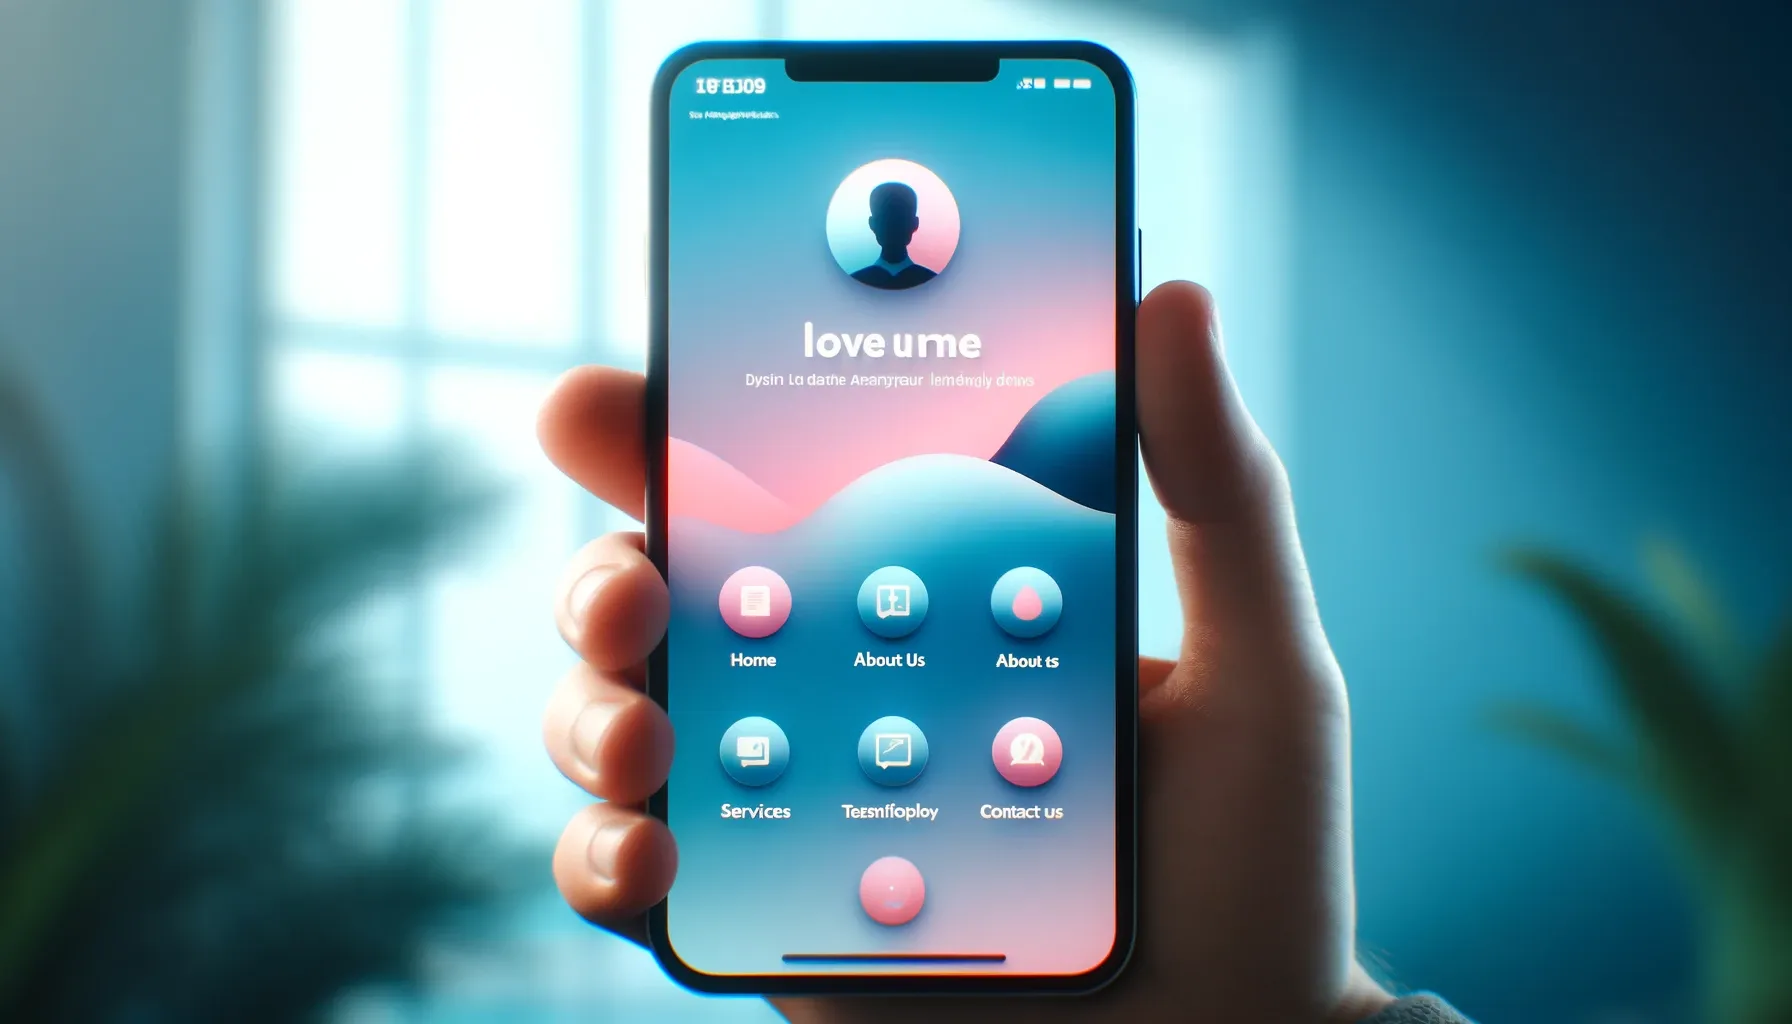 A smartphone displaying a gradient social media landing page with navigation buttons